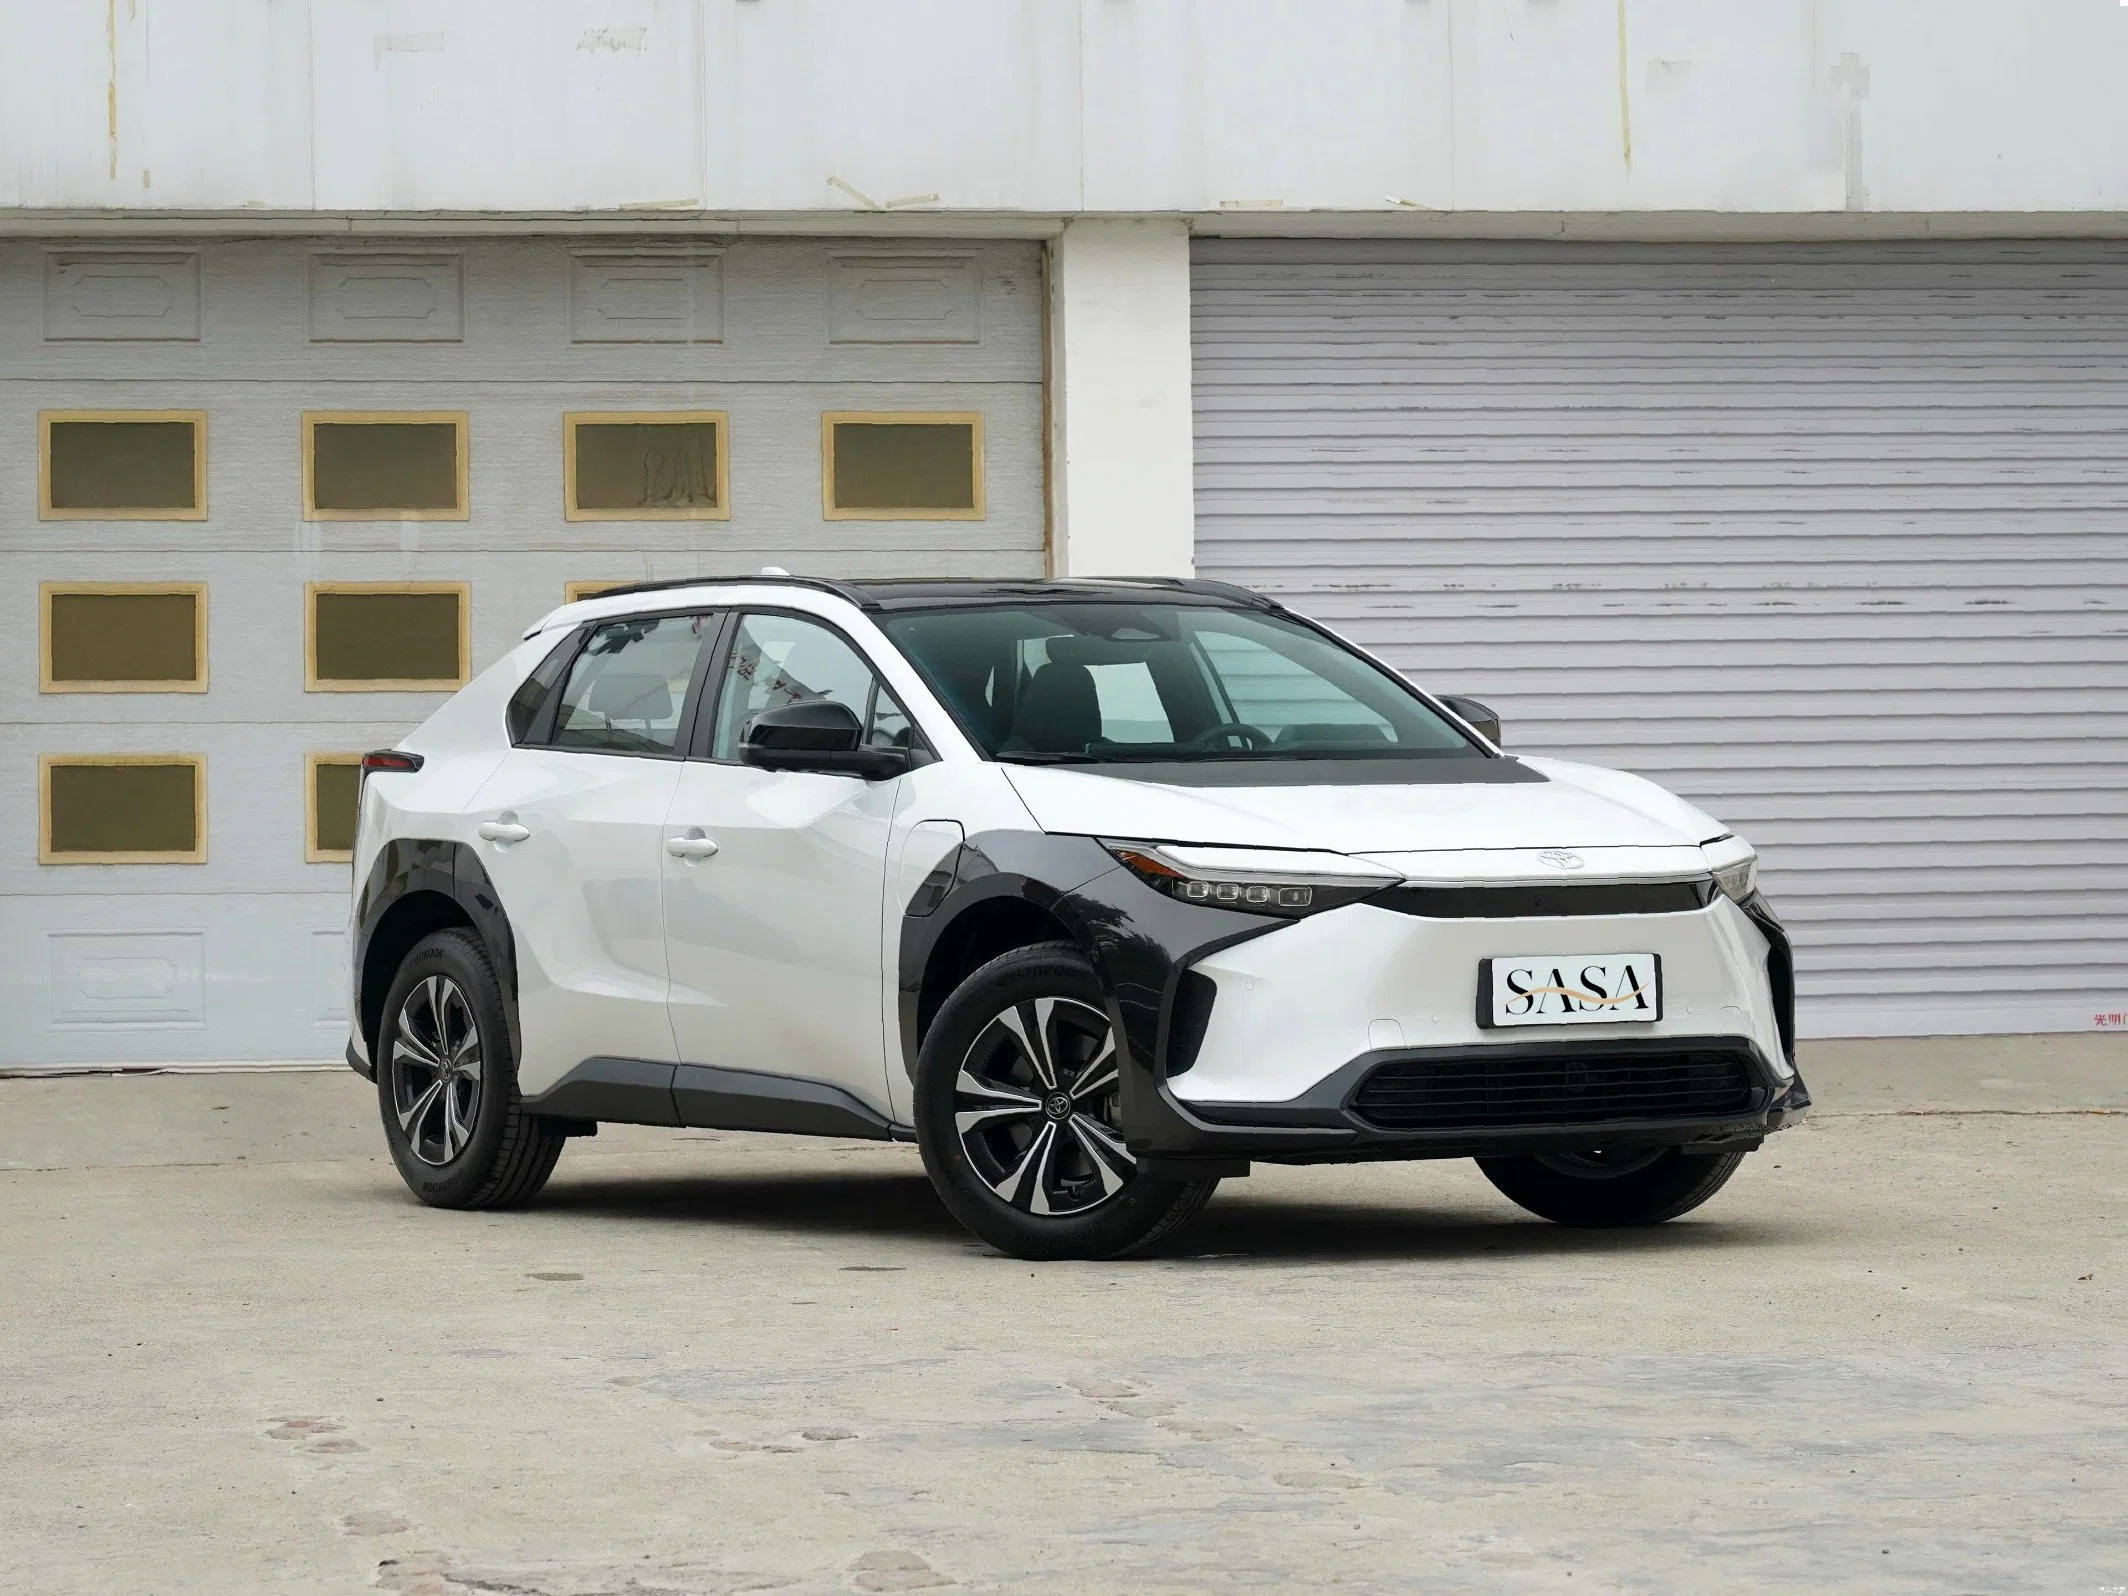 2023 New Energy 4WD Used Toyota Bz4X Used Car SUV Electric 4 Wheel Cars Vehicles High Speed 2WD Toyota Bz4X 615km Sell